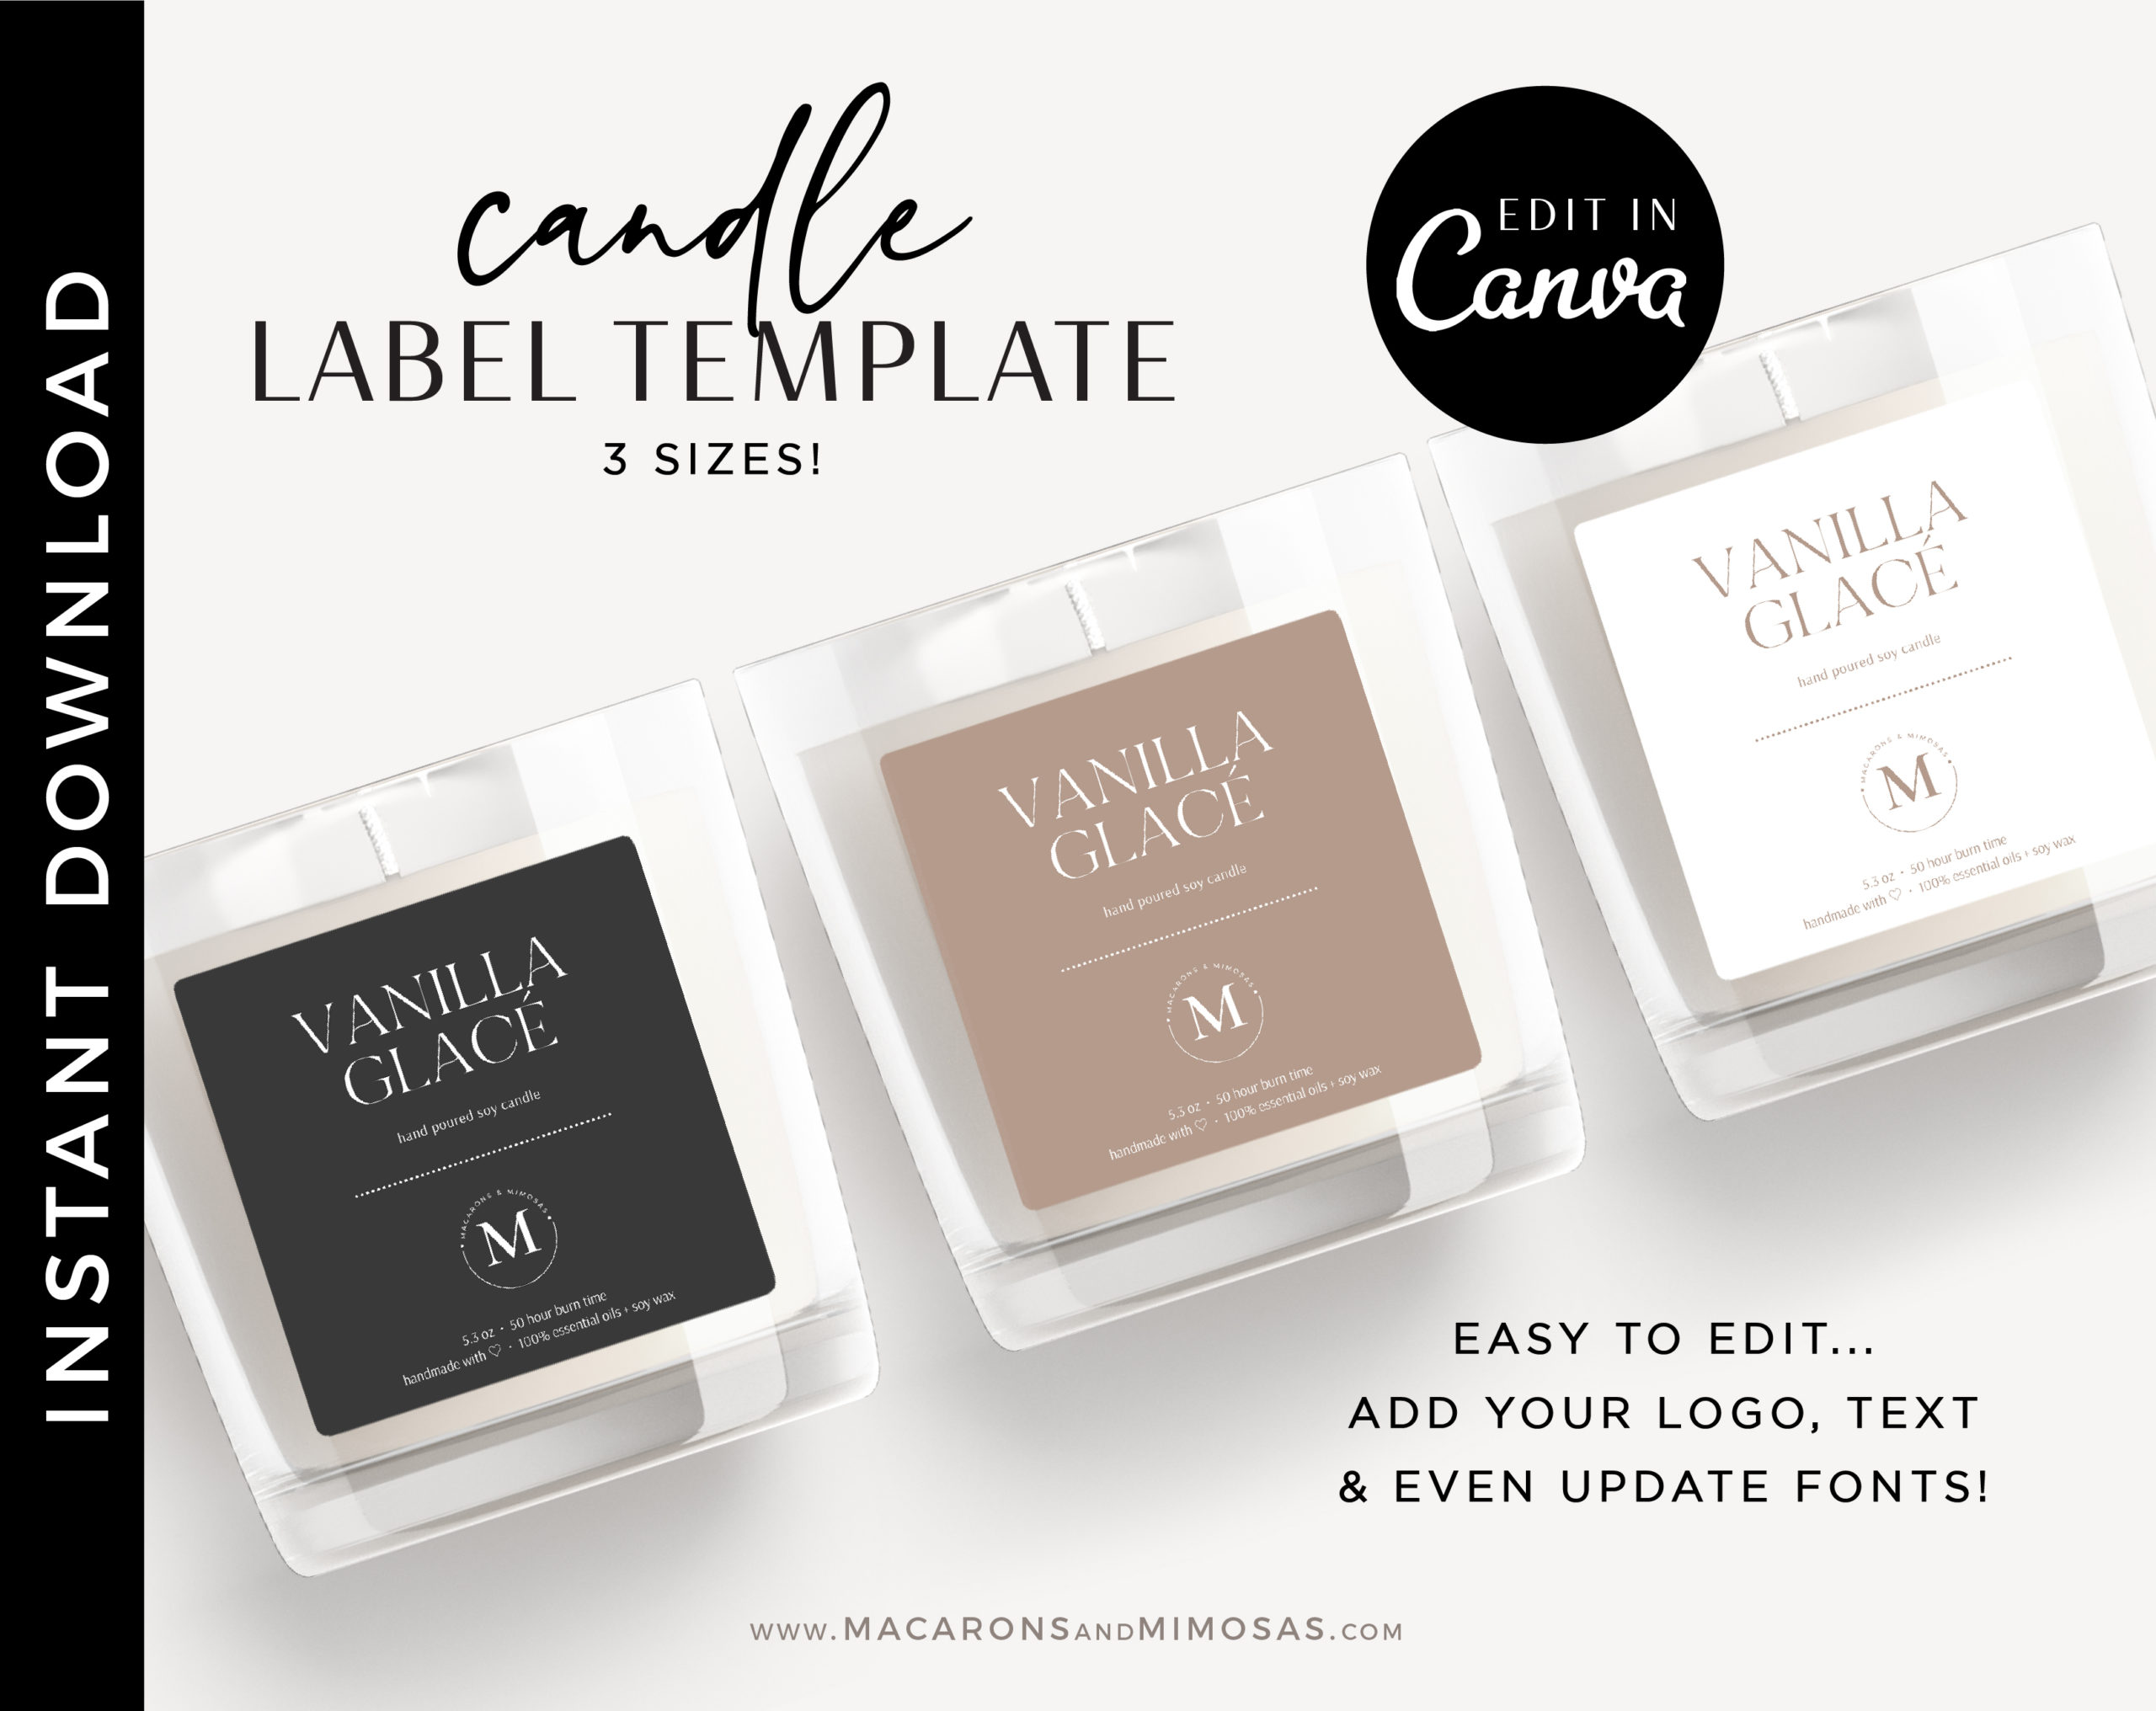 DIY Candle Label, DIY Printable Candle Labels, Personalized Candle Sticker Design, Candle Label Template, Minimal Candle Logo Jar Label